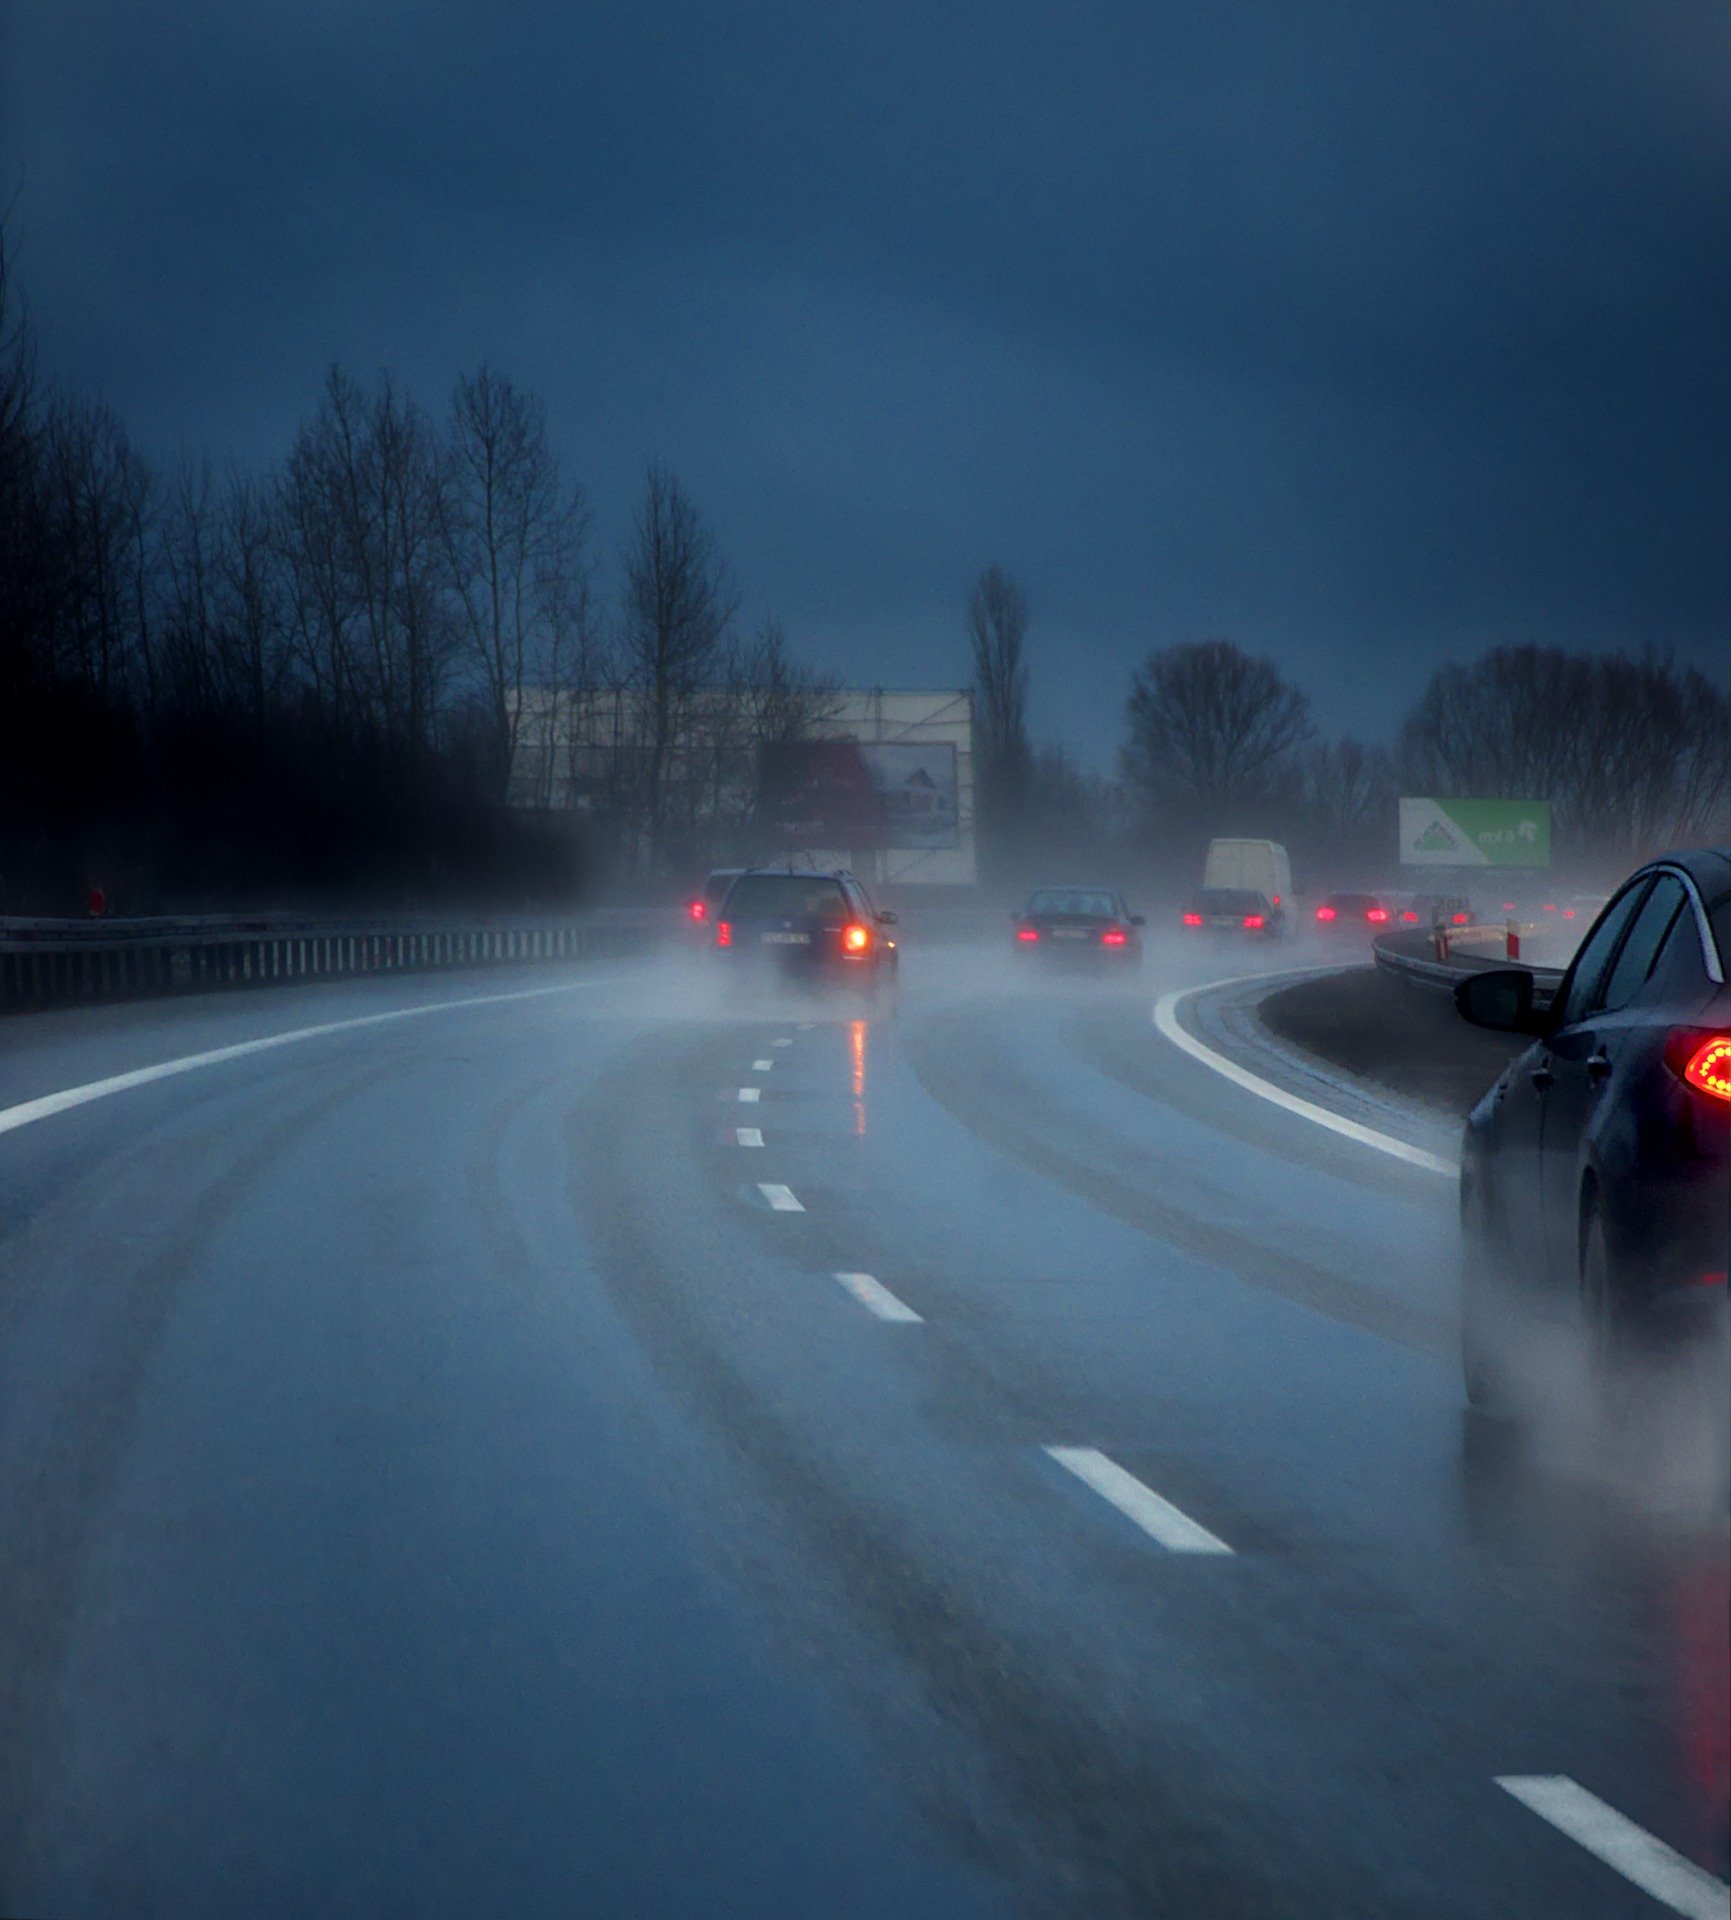 Pictured - Vehicles driving in the raining weather on the highway | Source: Pixabay